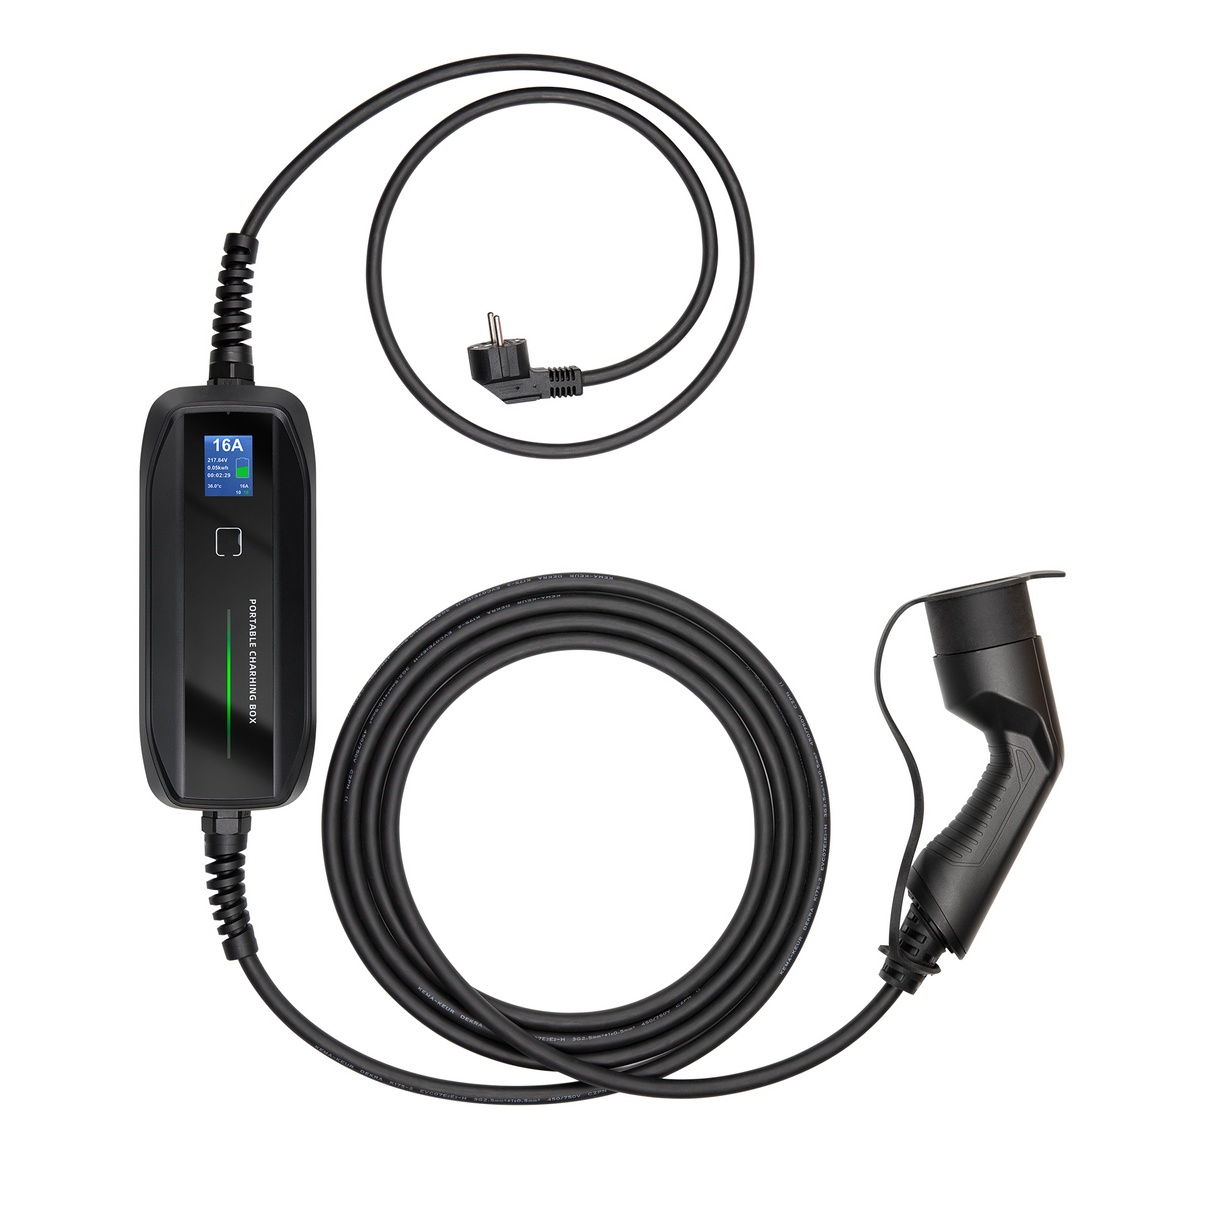 Mobile Charger Volvo EX90 - Besen with LCD - Type 2 to Schuko